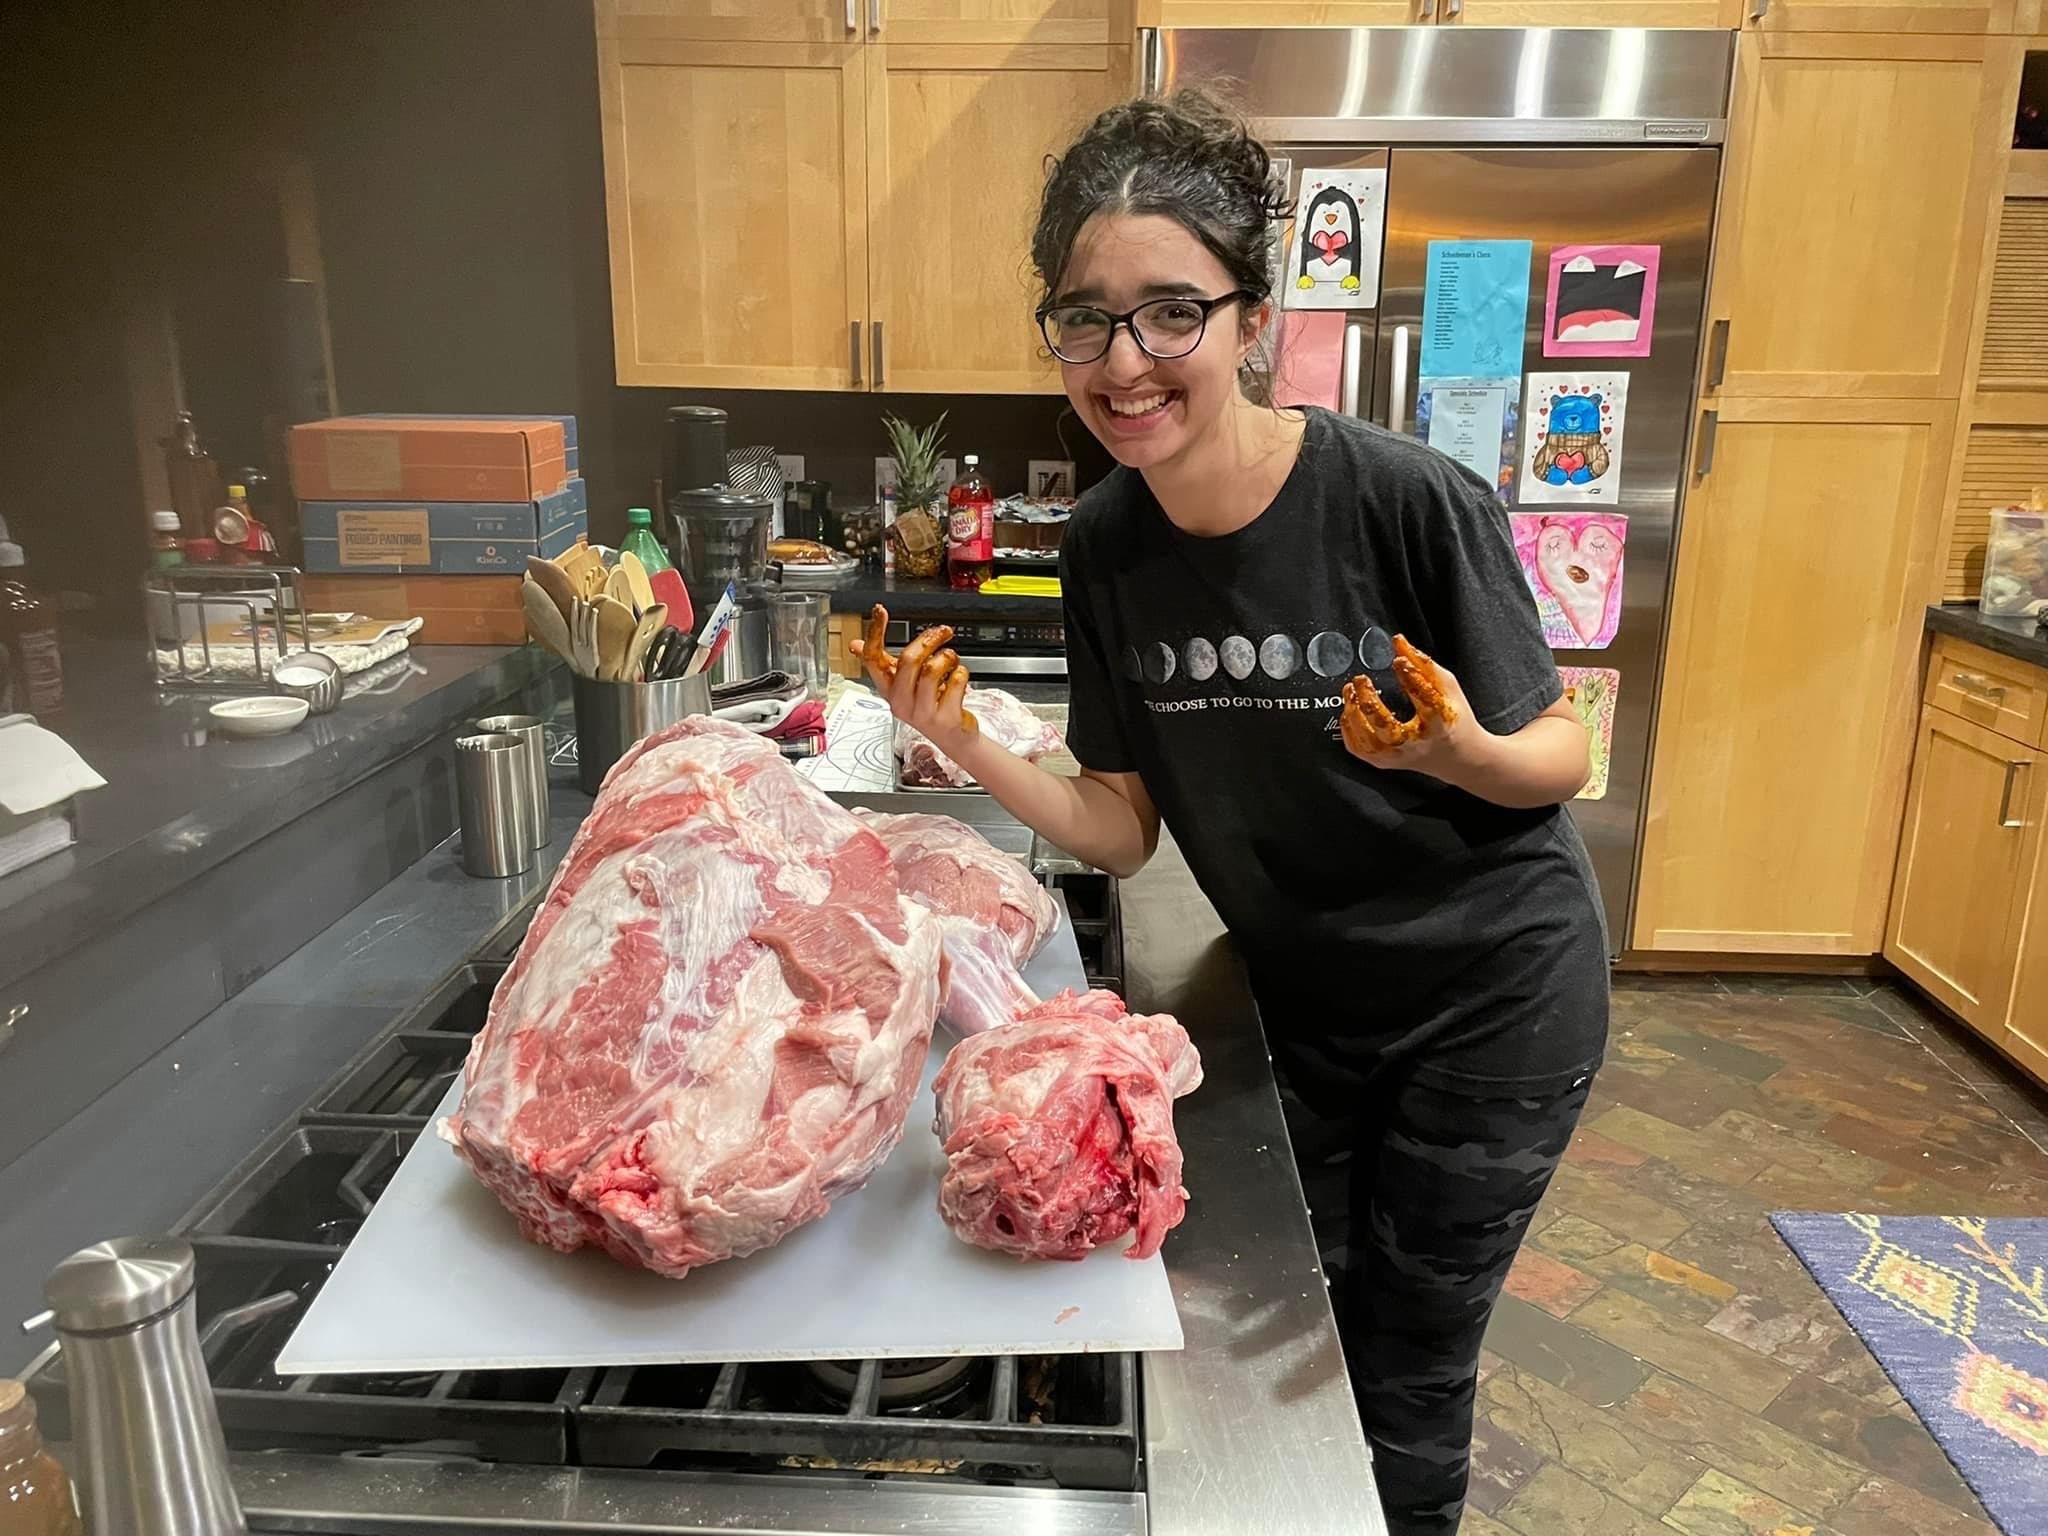 Hind poses with meat at a butcher shop